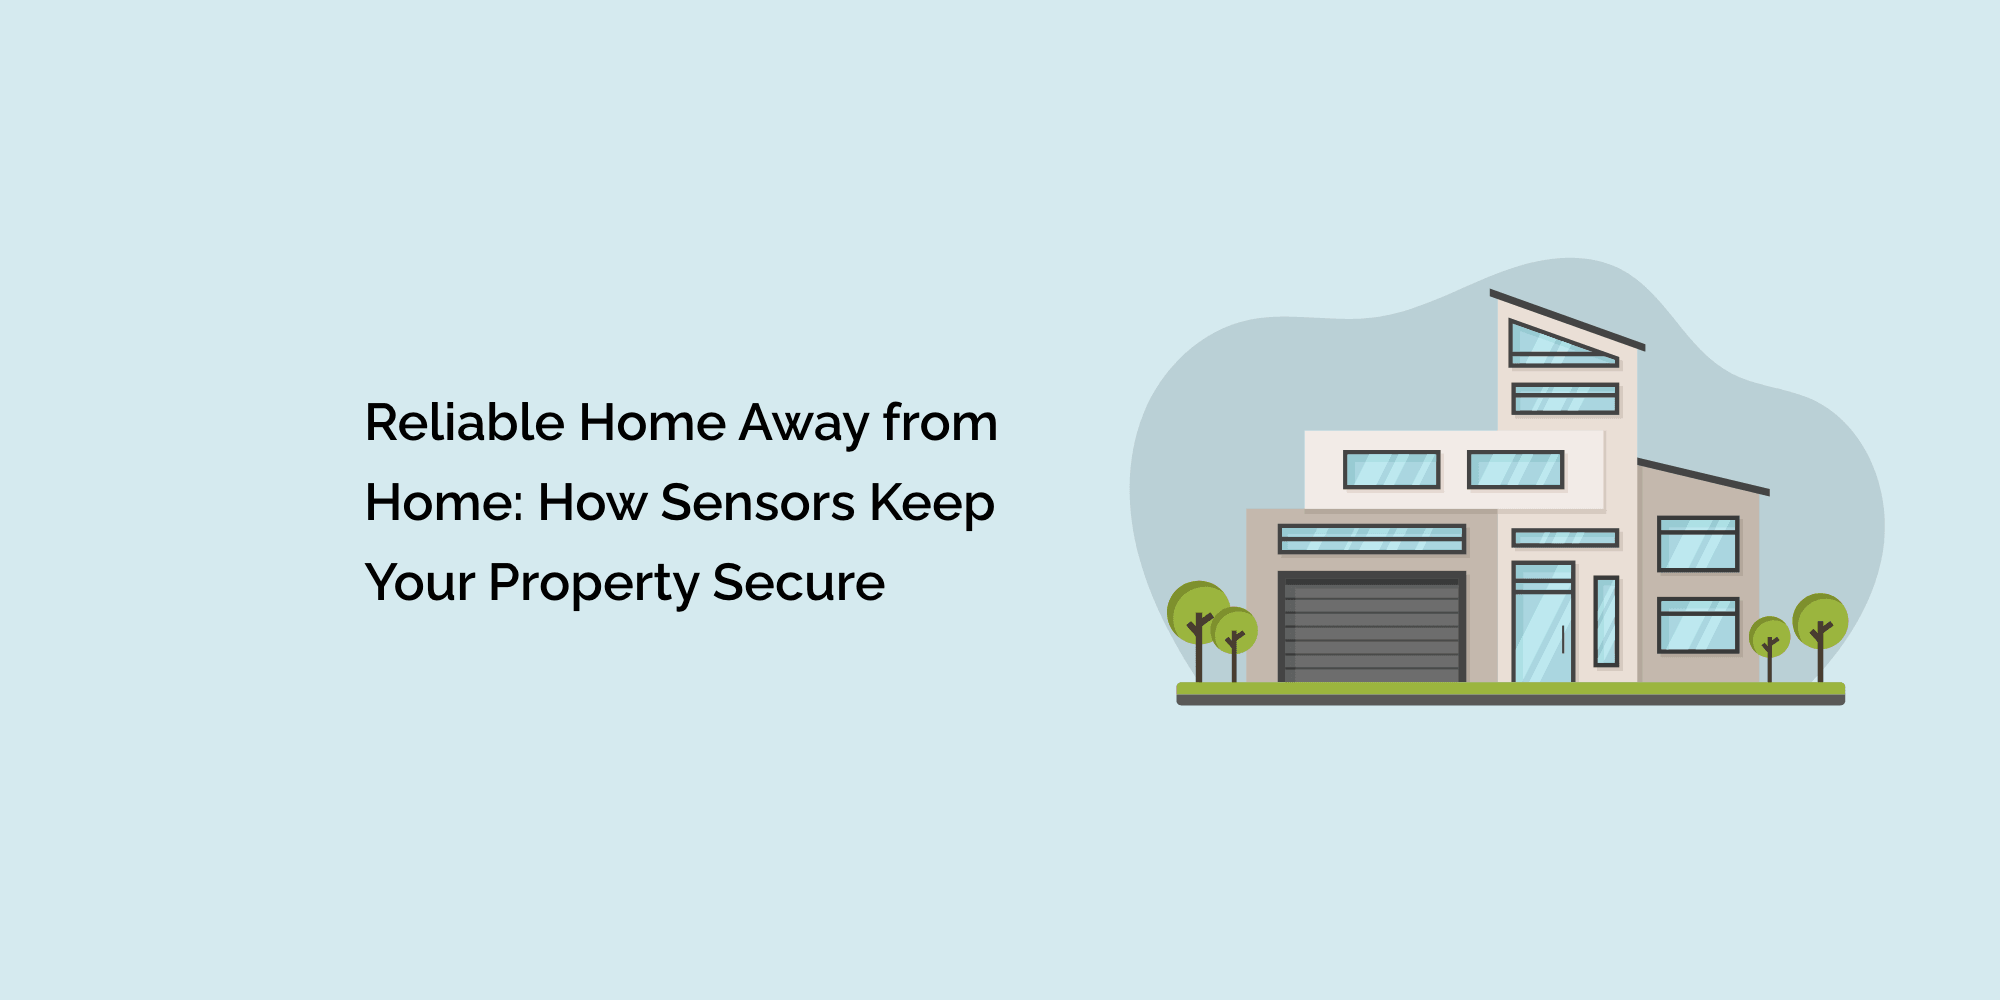 Reliable Home Away from Home: How Sensors Keep Your Property Secure